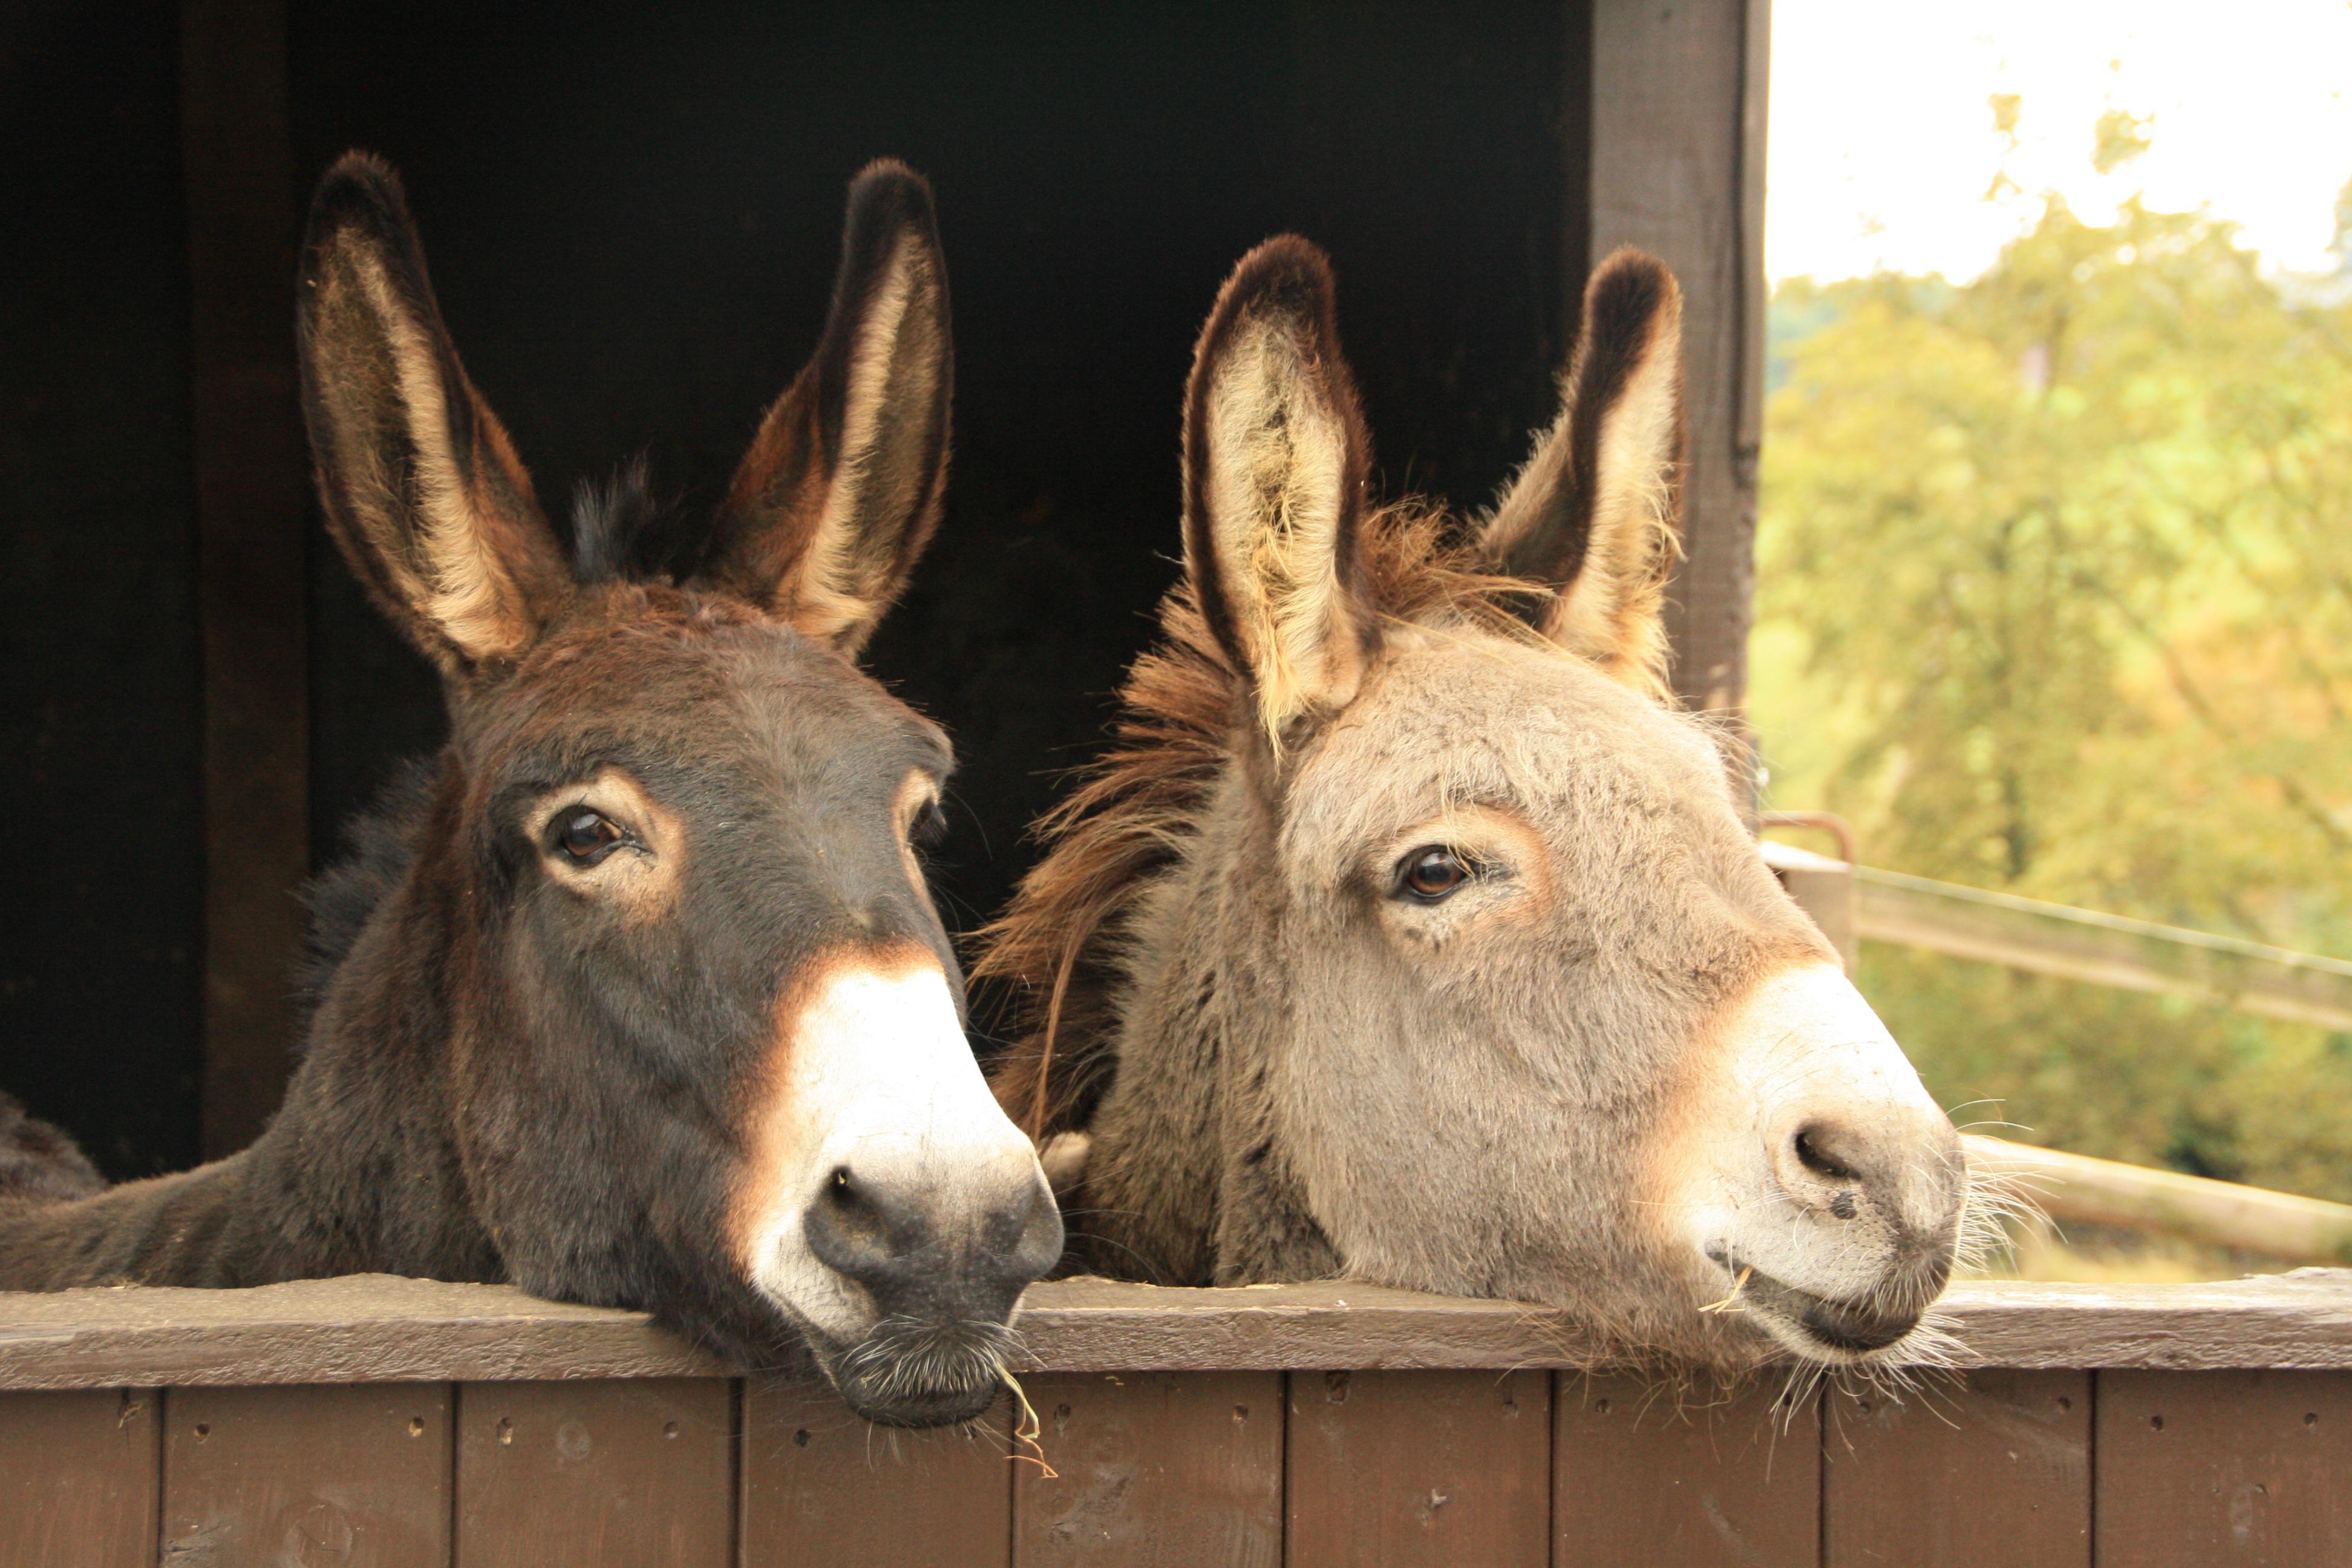 Two donkeys lean on a fence.